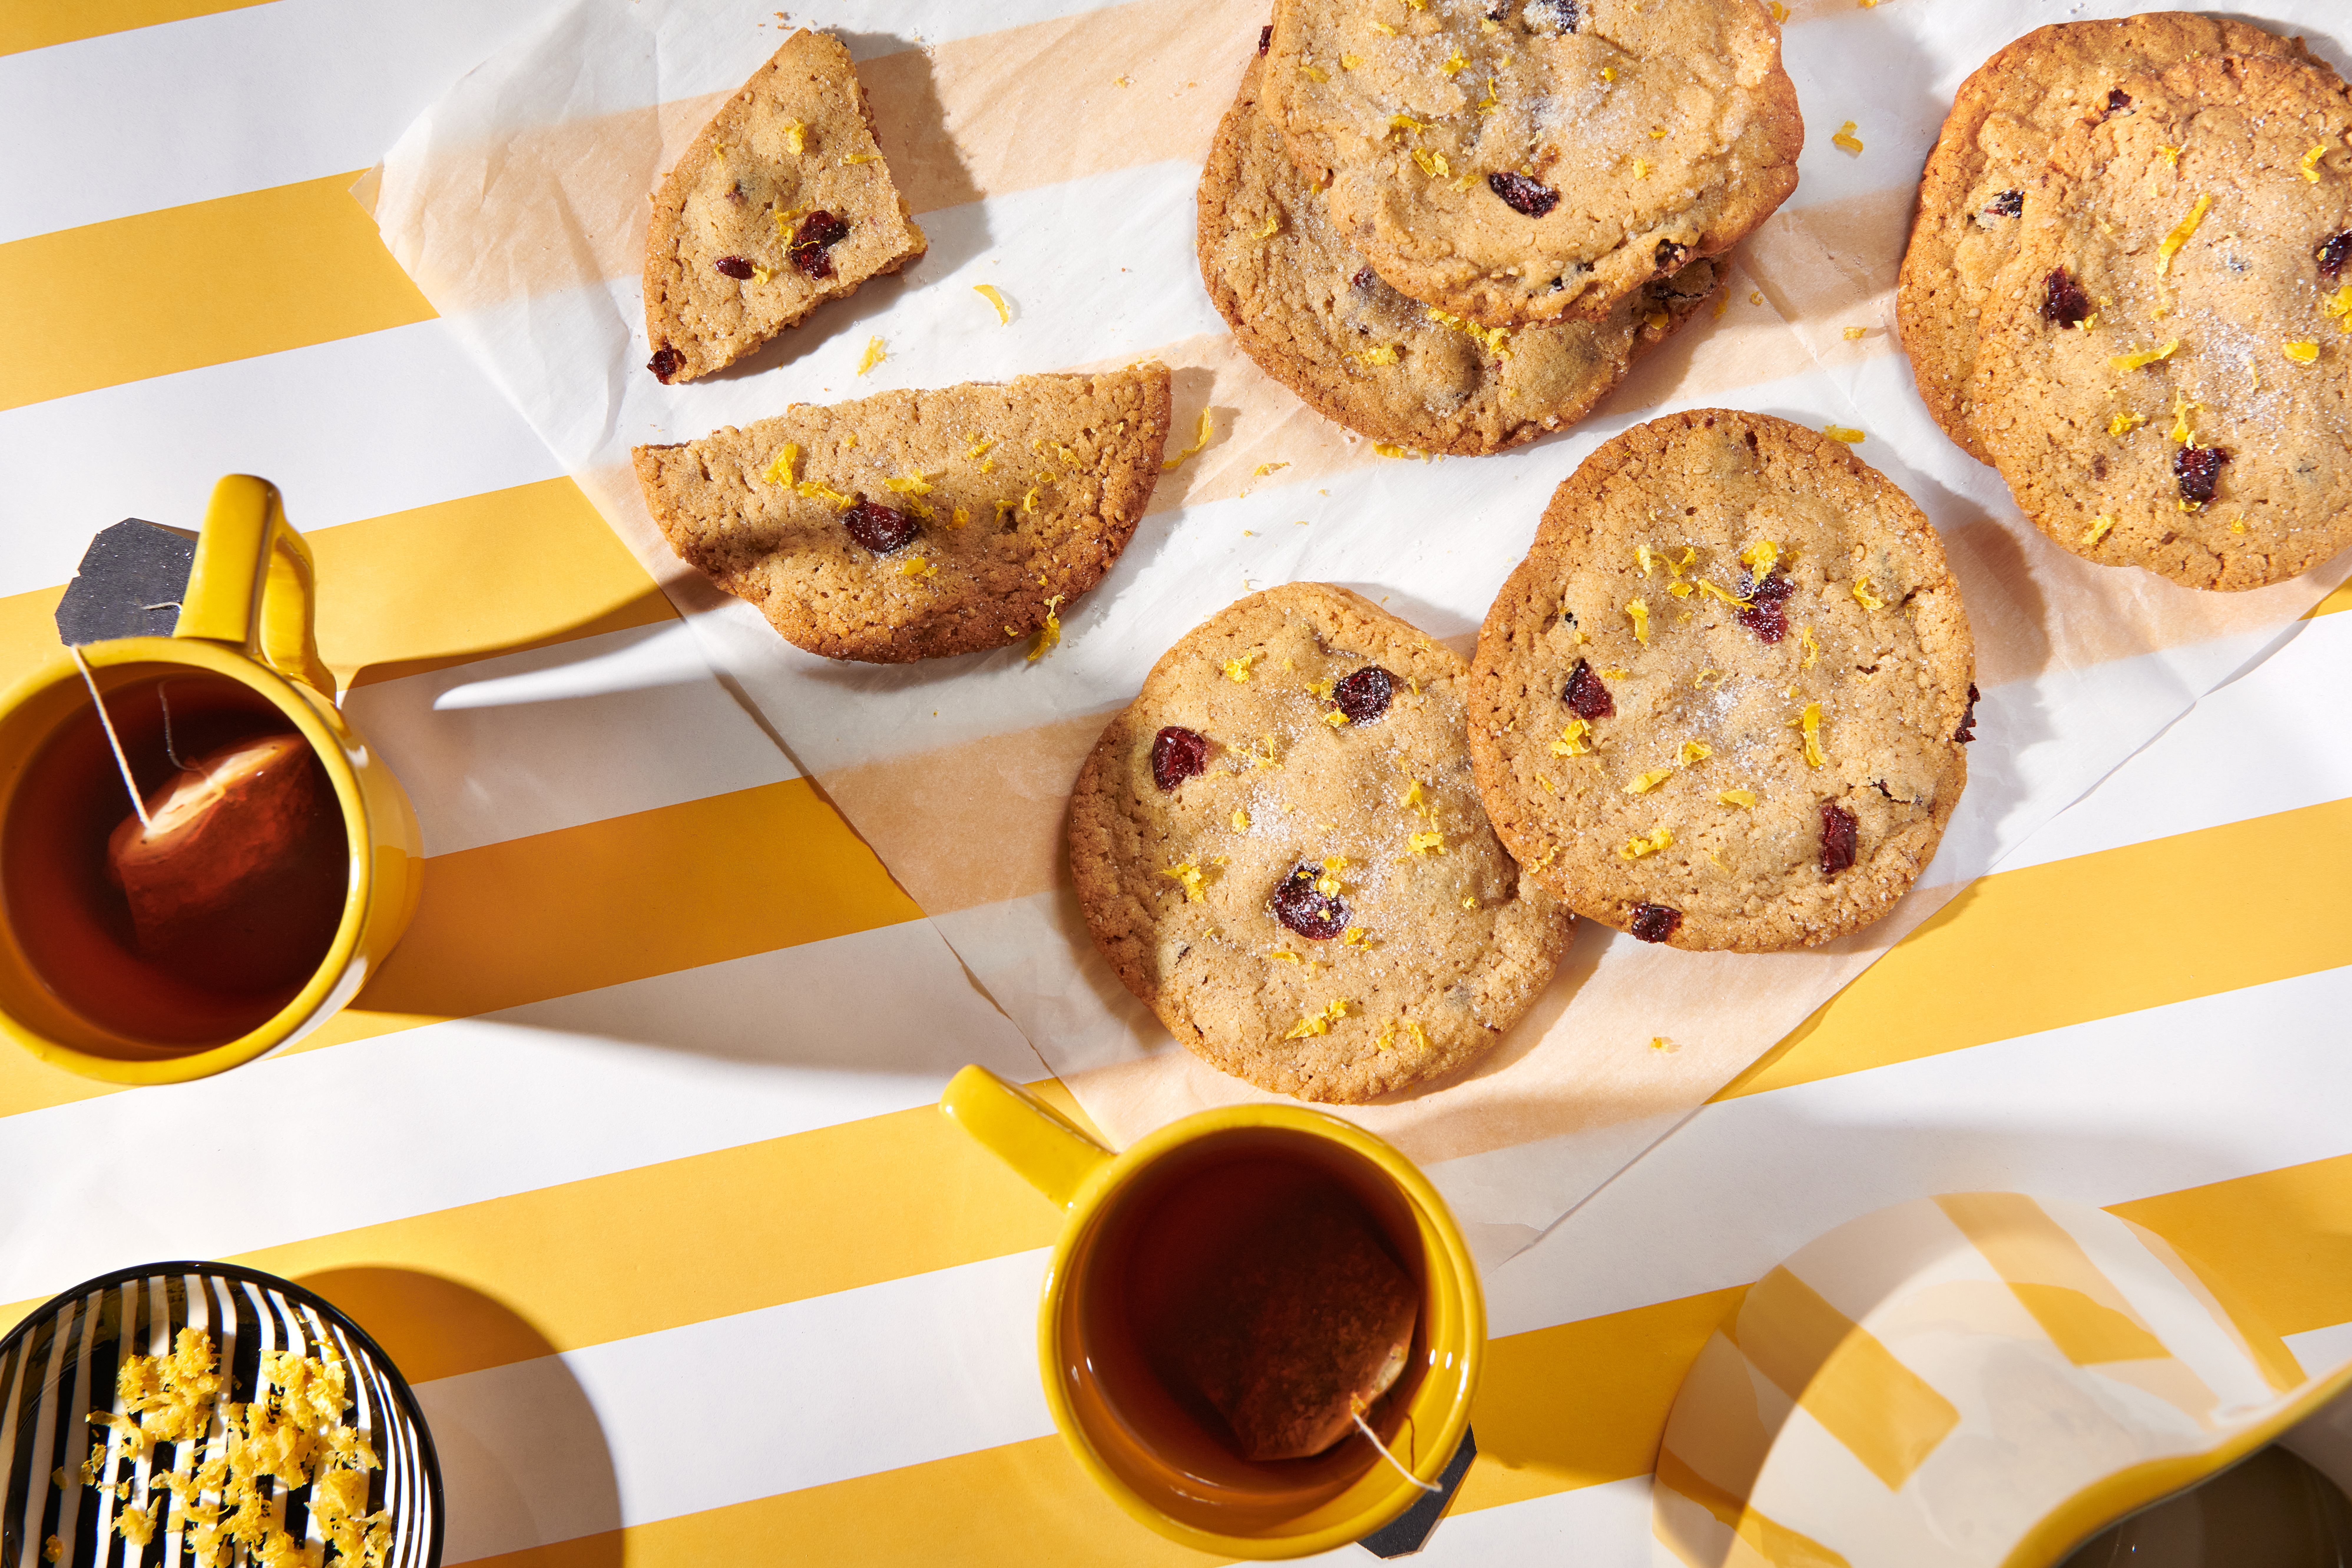 A tray of sesame cherry cookies set on a yellow-and-white striped tablecloth with cups of tea.